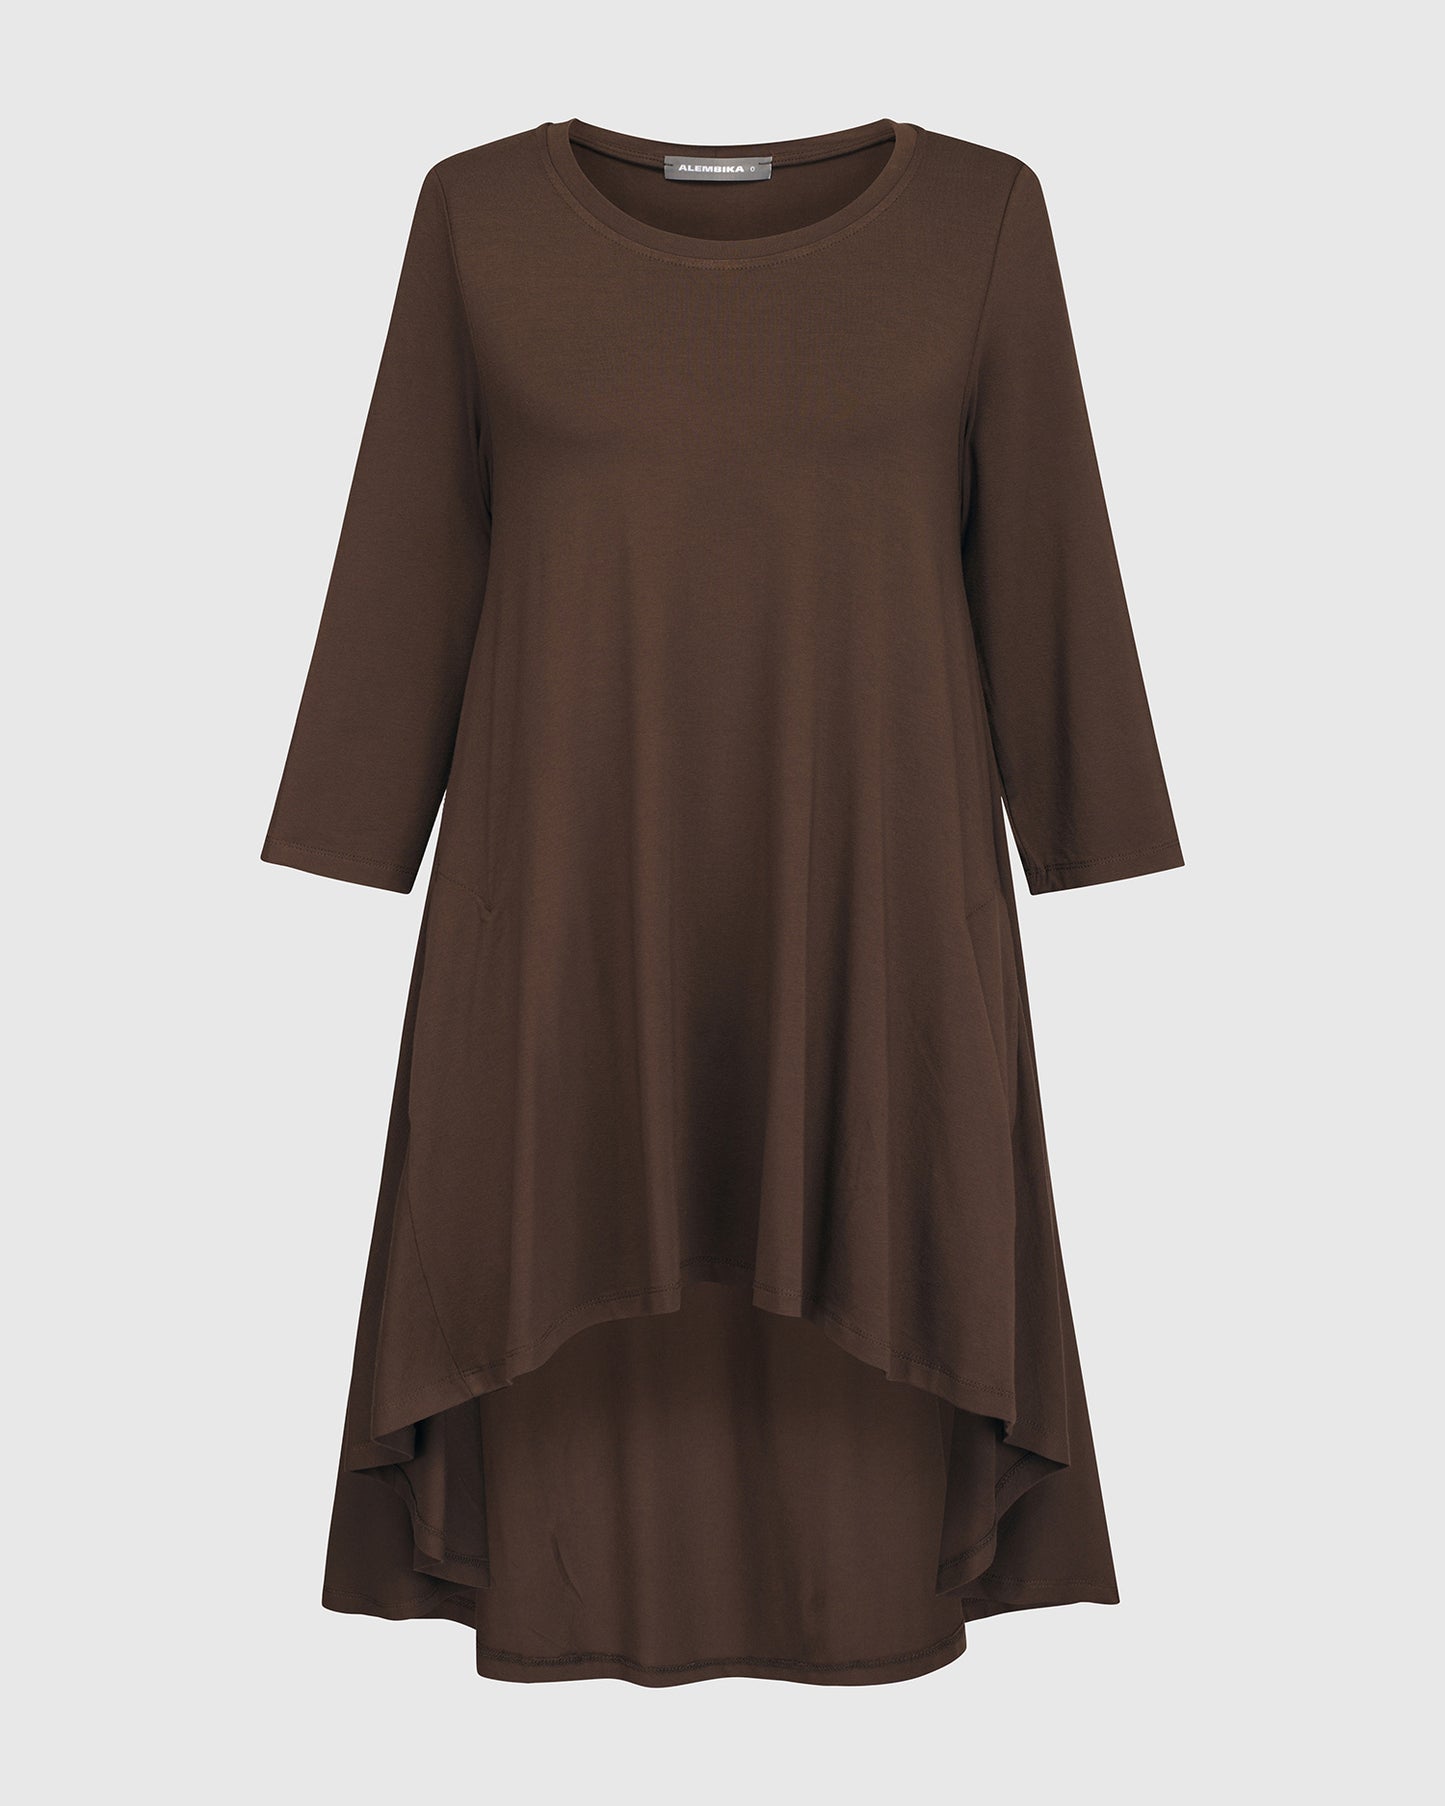 Essential Swing Tunic Top, Coffee by Alembika